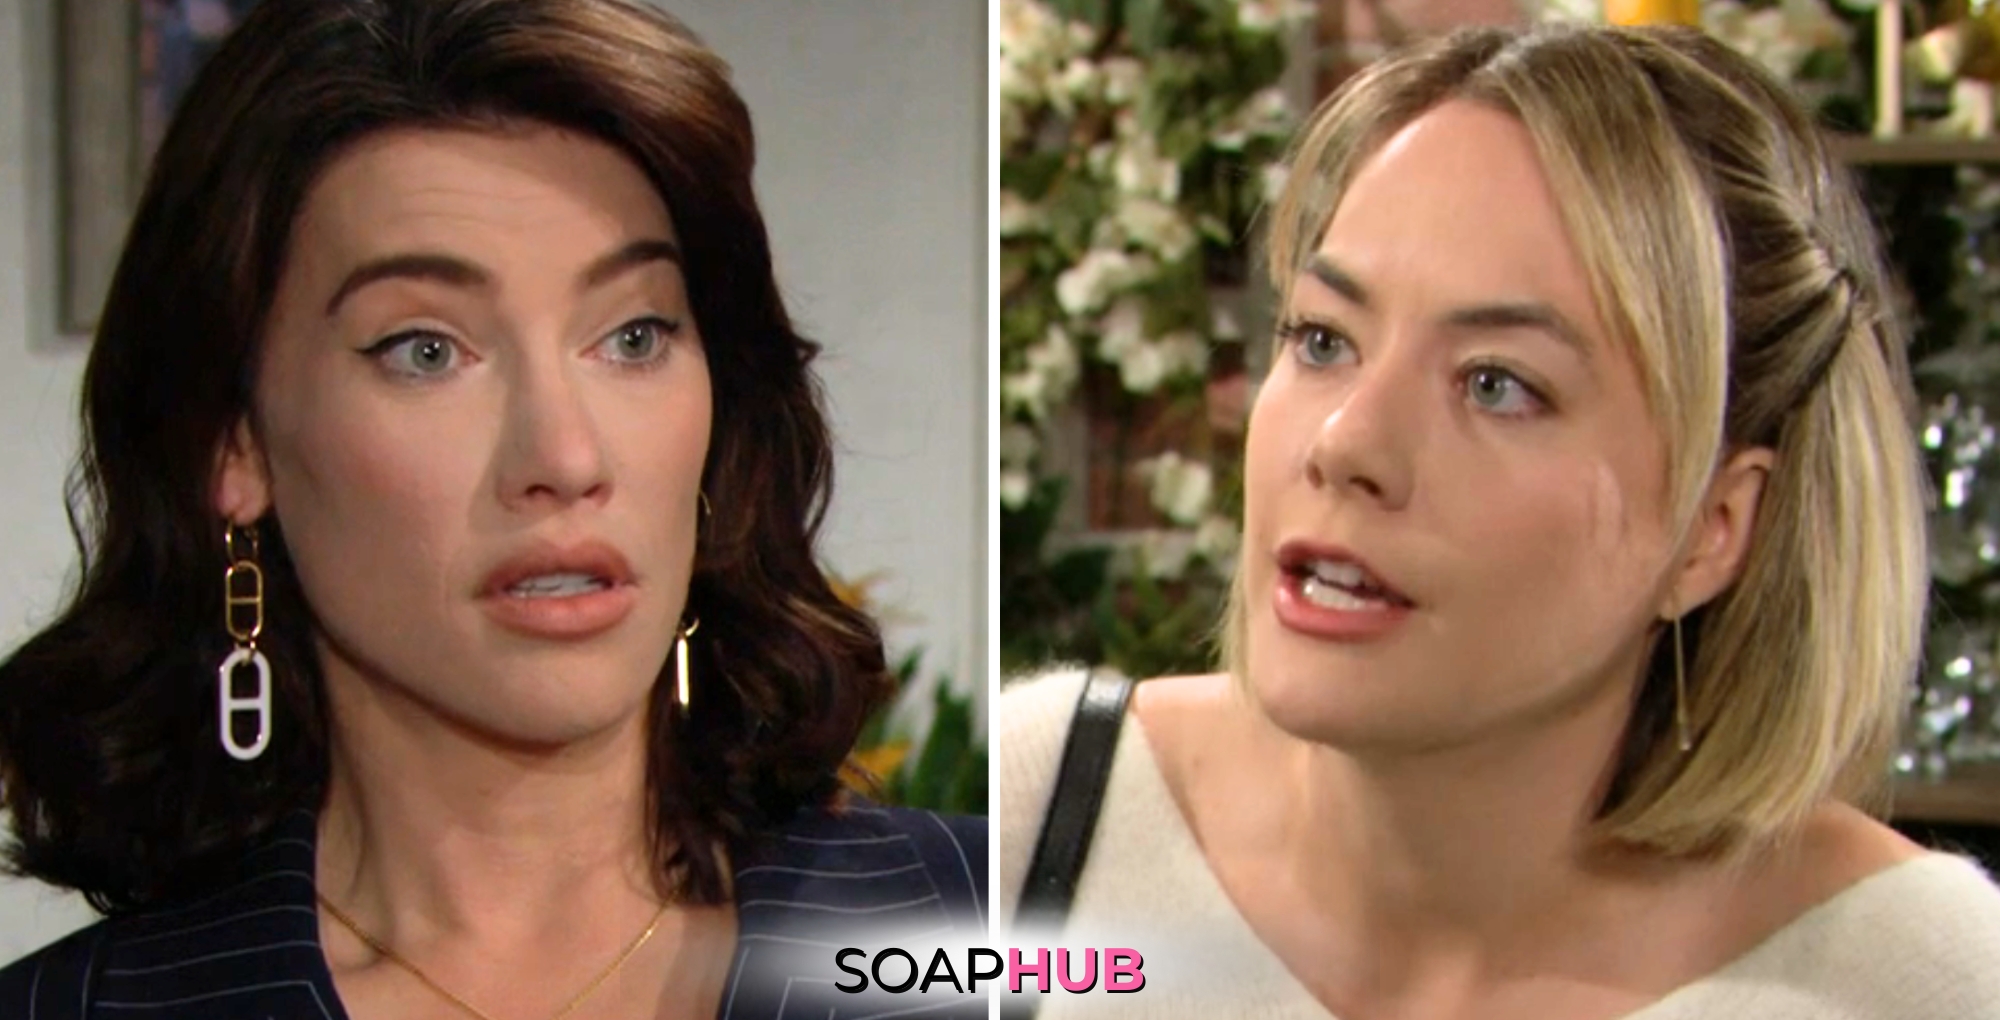 Bold and the Beautiful Spoilers for Wednesday, March 20 Episode 9234 feature Steffy and Hope with the Soap Hub logo across the bottom.